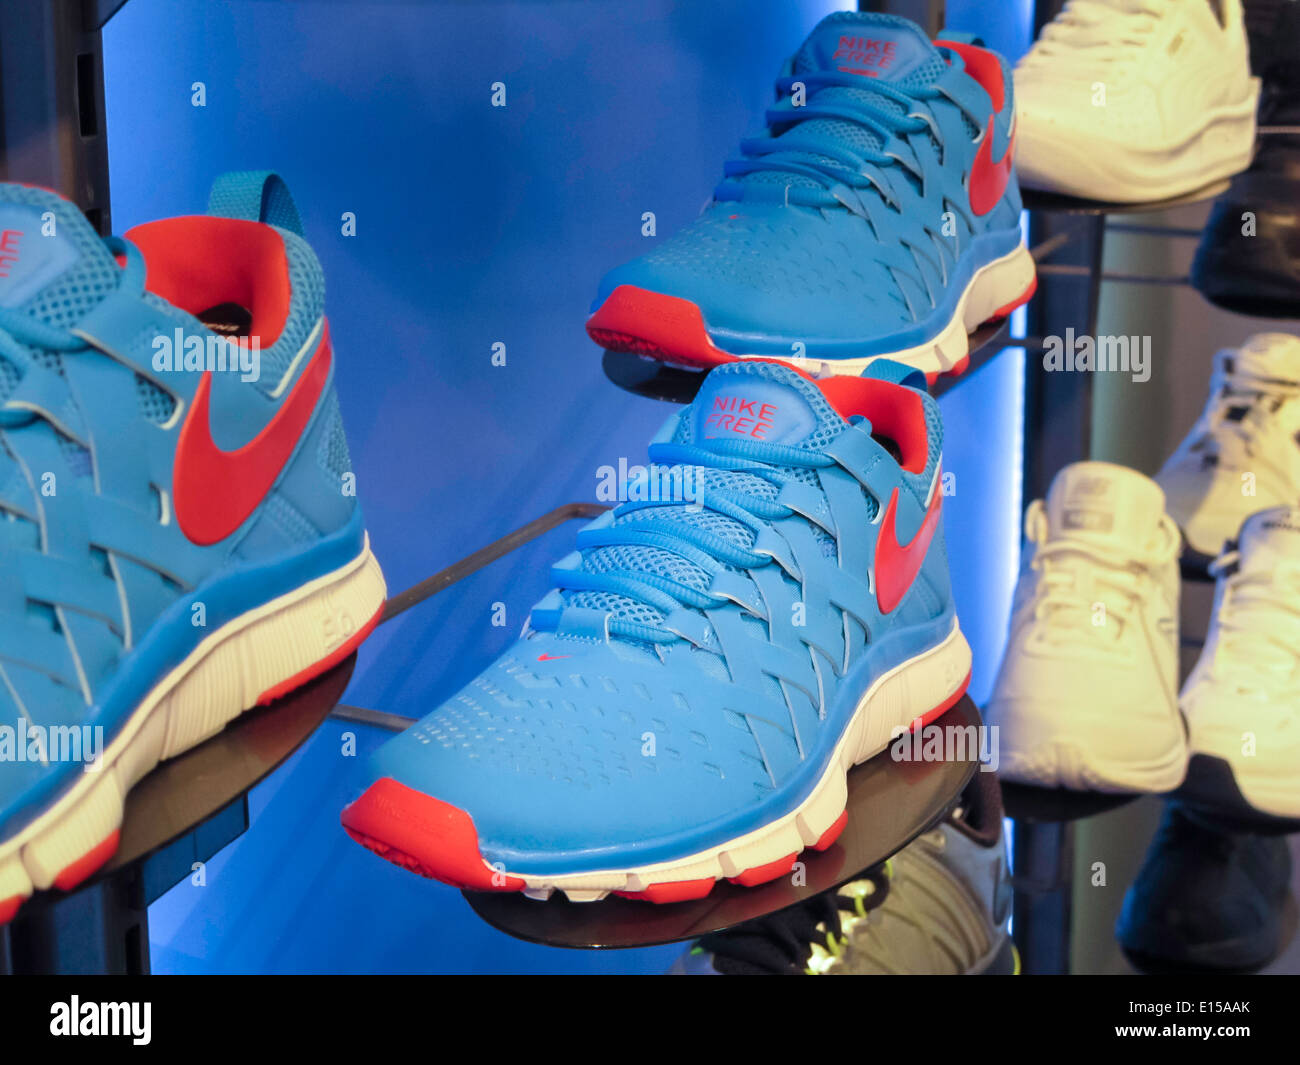 Athletic Footwear Wall with Nikes  with Swoosh Logo,, Modell's Sporting Goods Store Interior, NYC Stock Photo